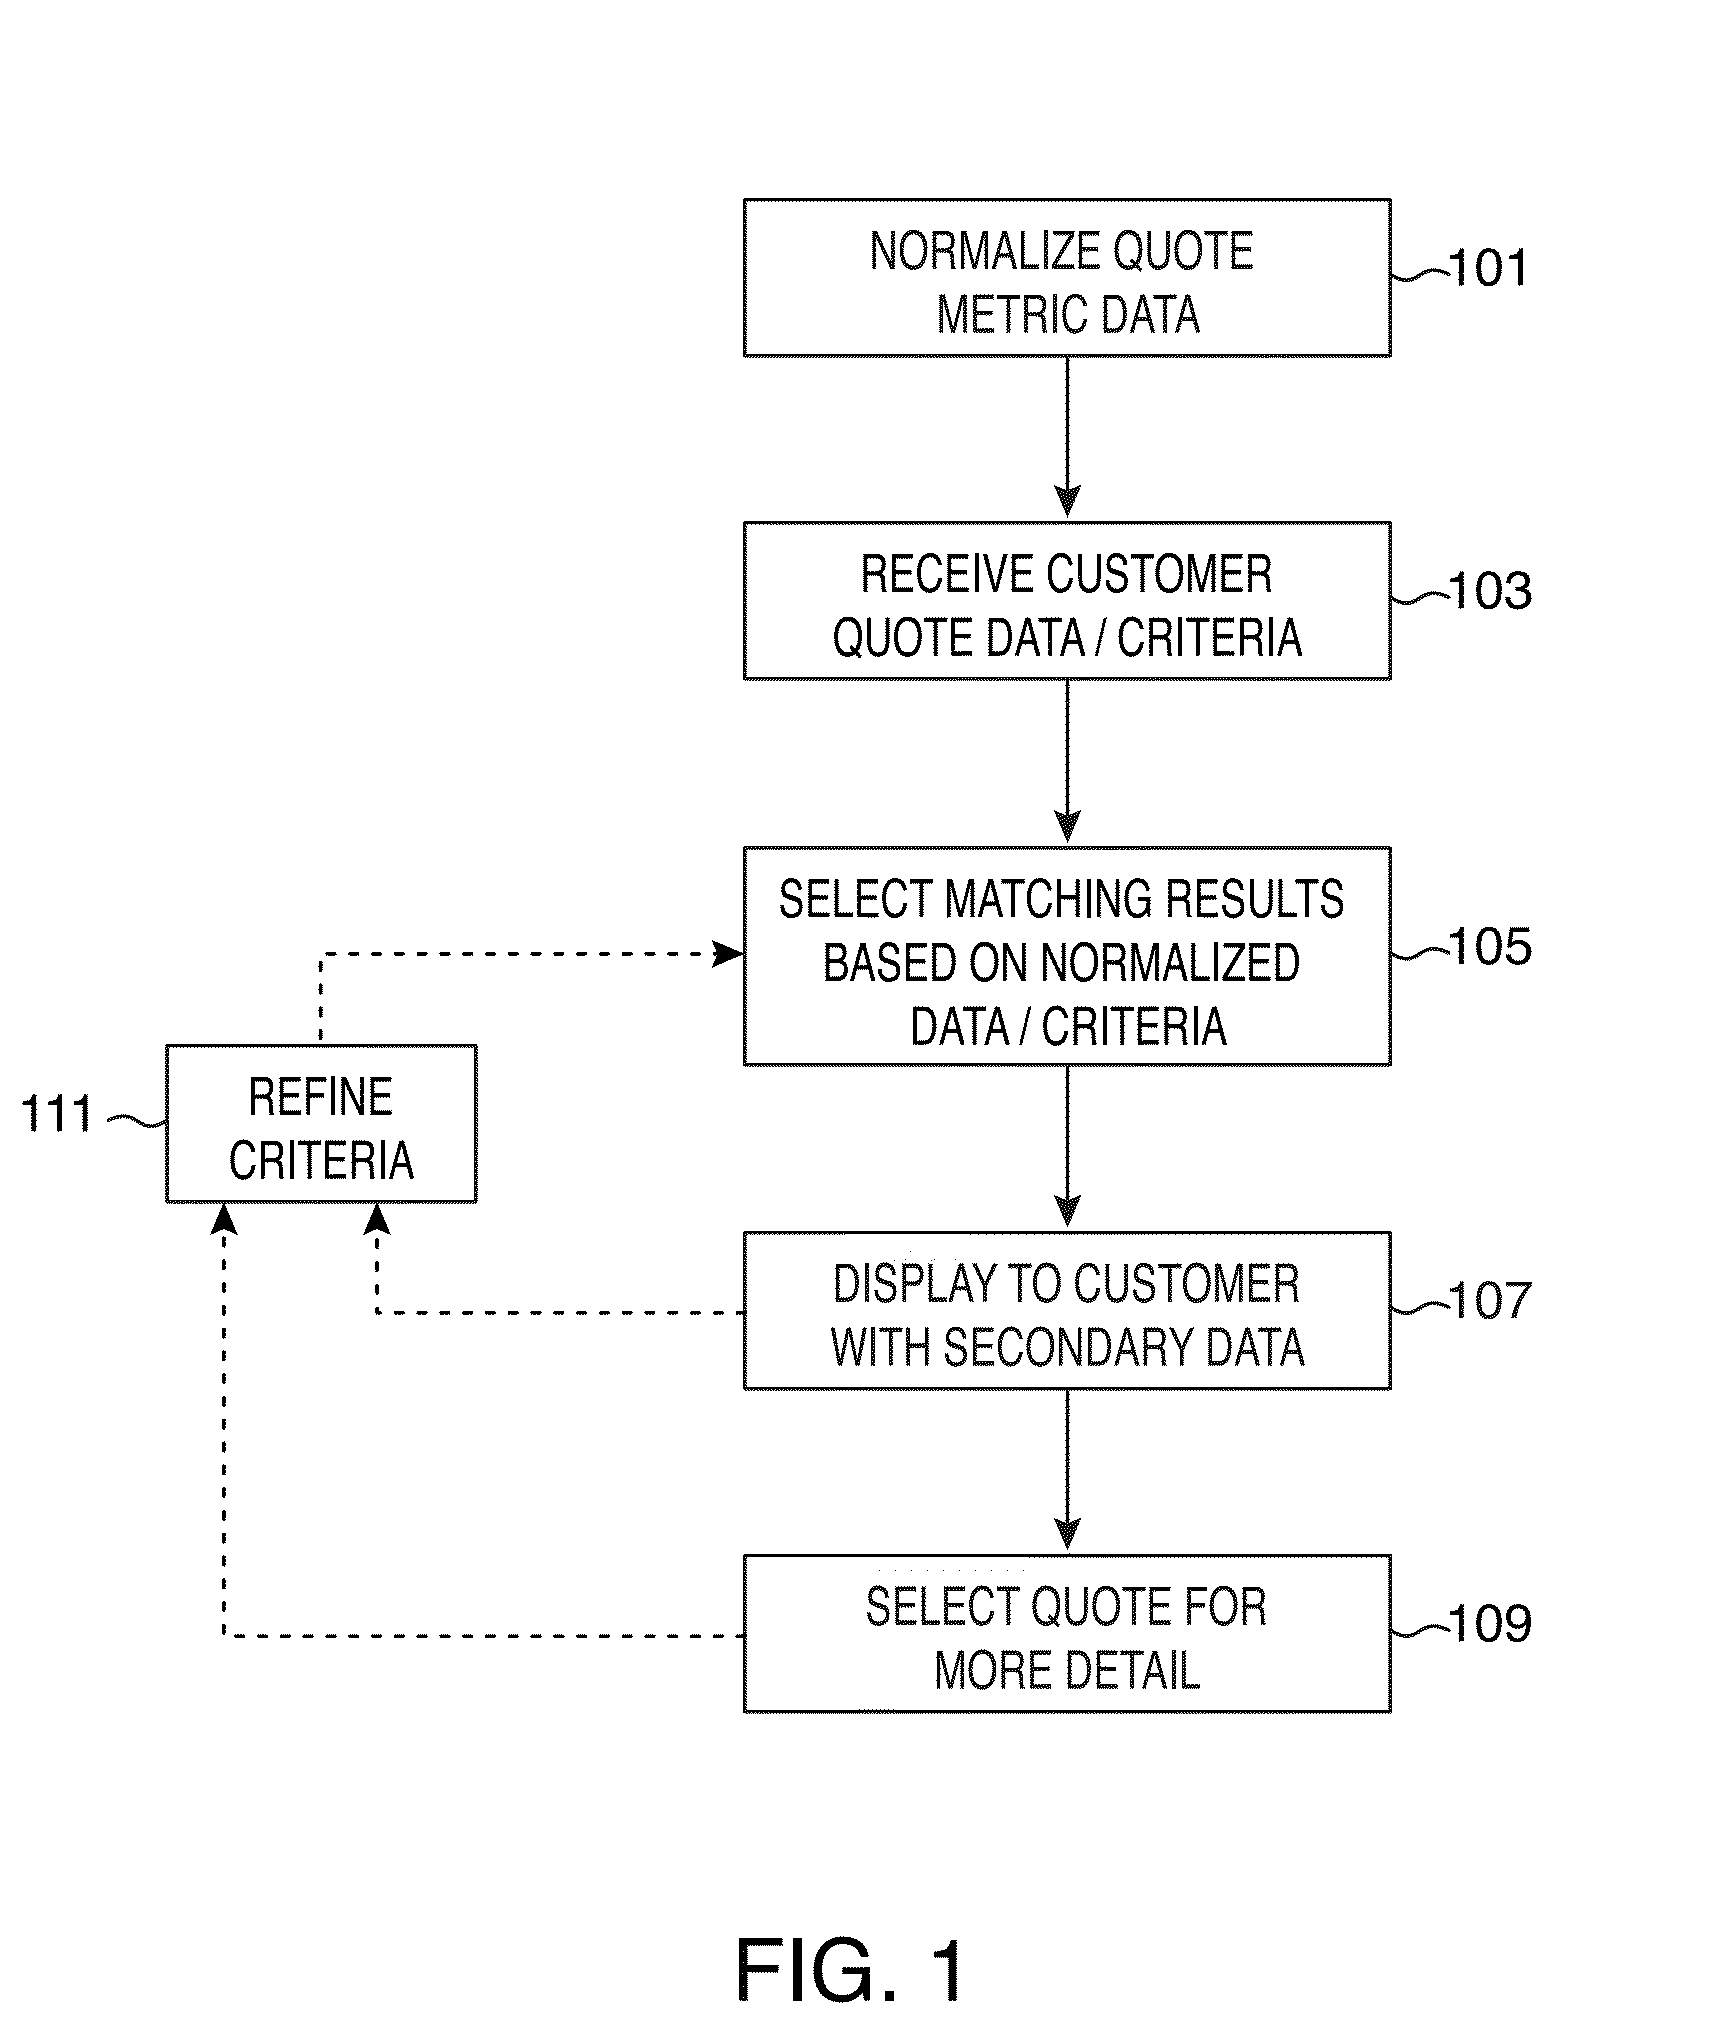 Systems and methods for normalizing and comparatively displaying disparate service offerings